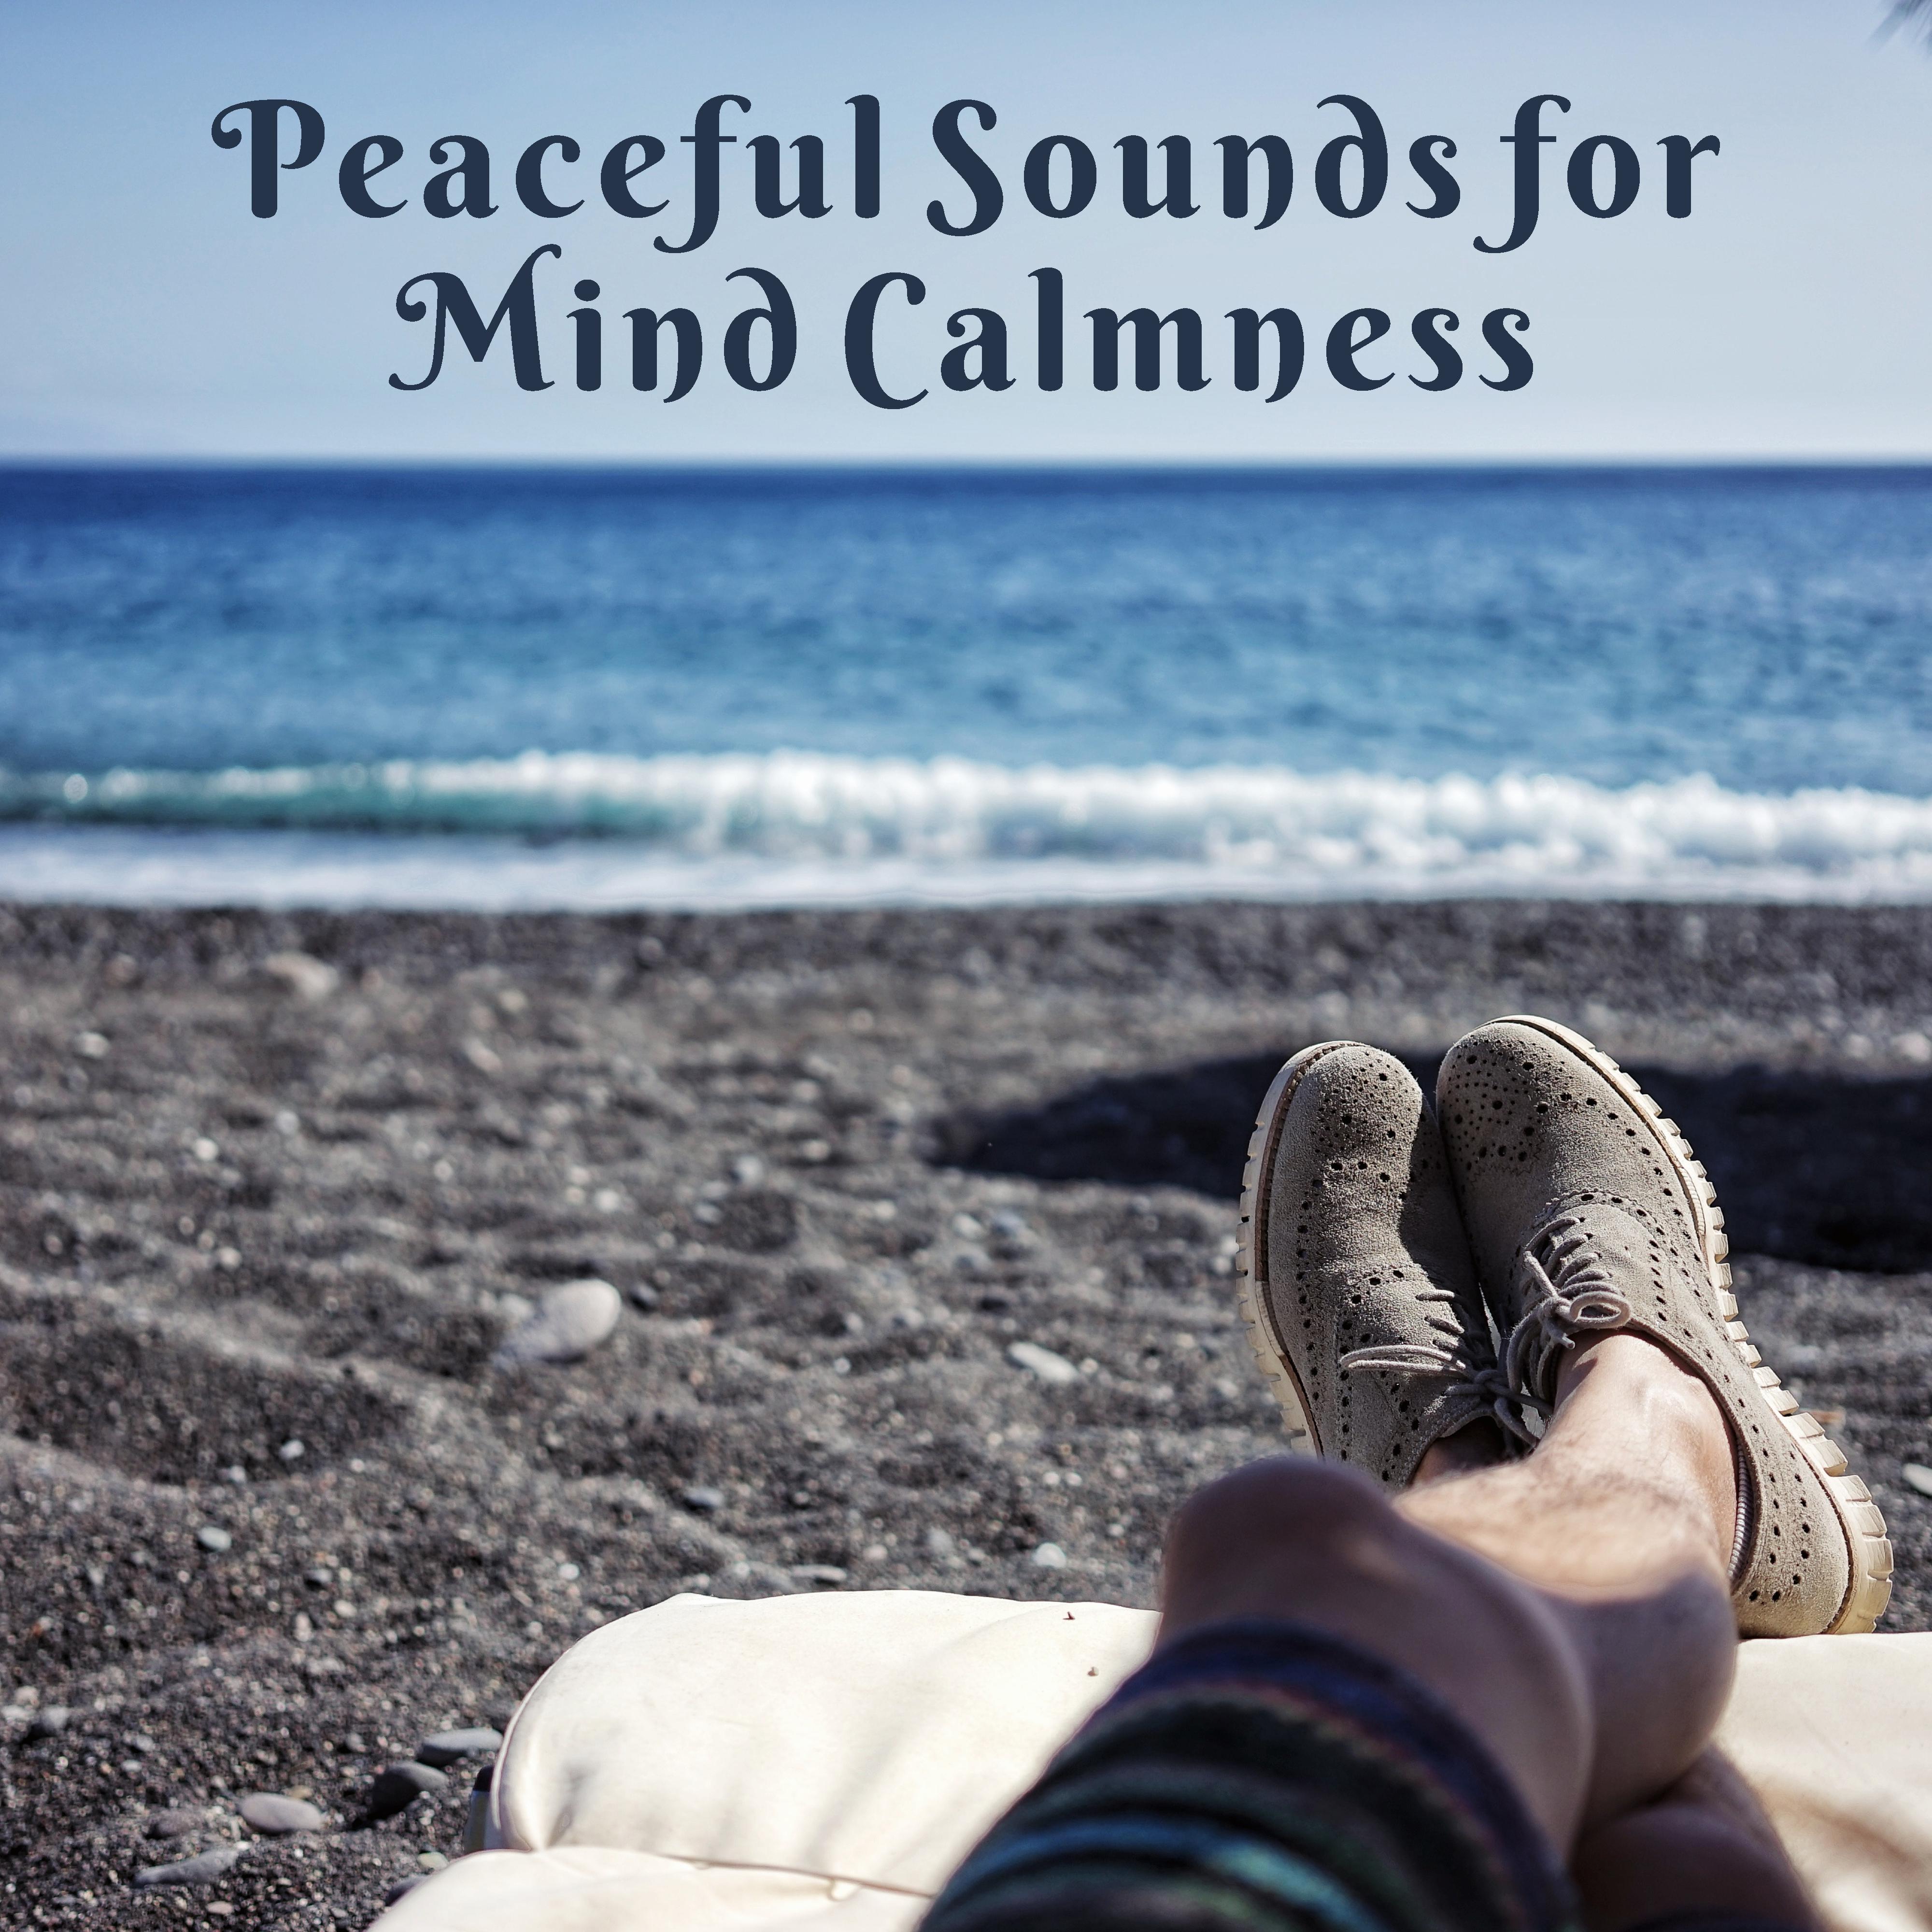 Peaceful Sounds for Mind Calmness  Rest a Bit, Relax Yourself, Easy Listening, New Age Relaxation, Stress Relief